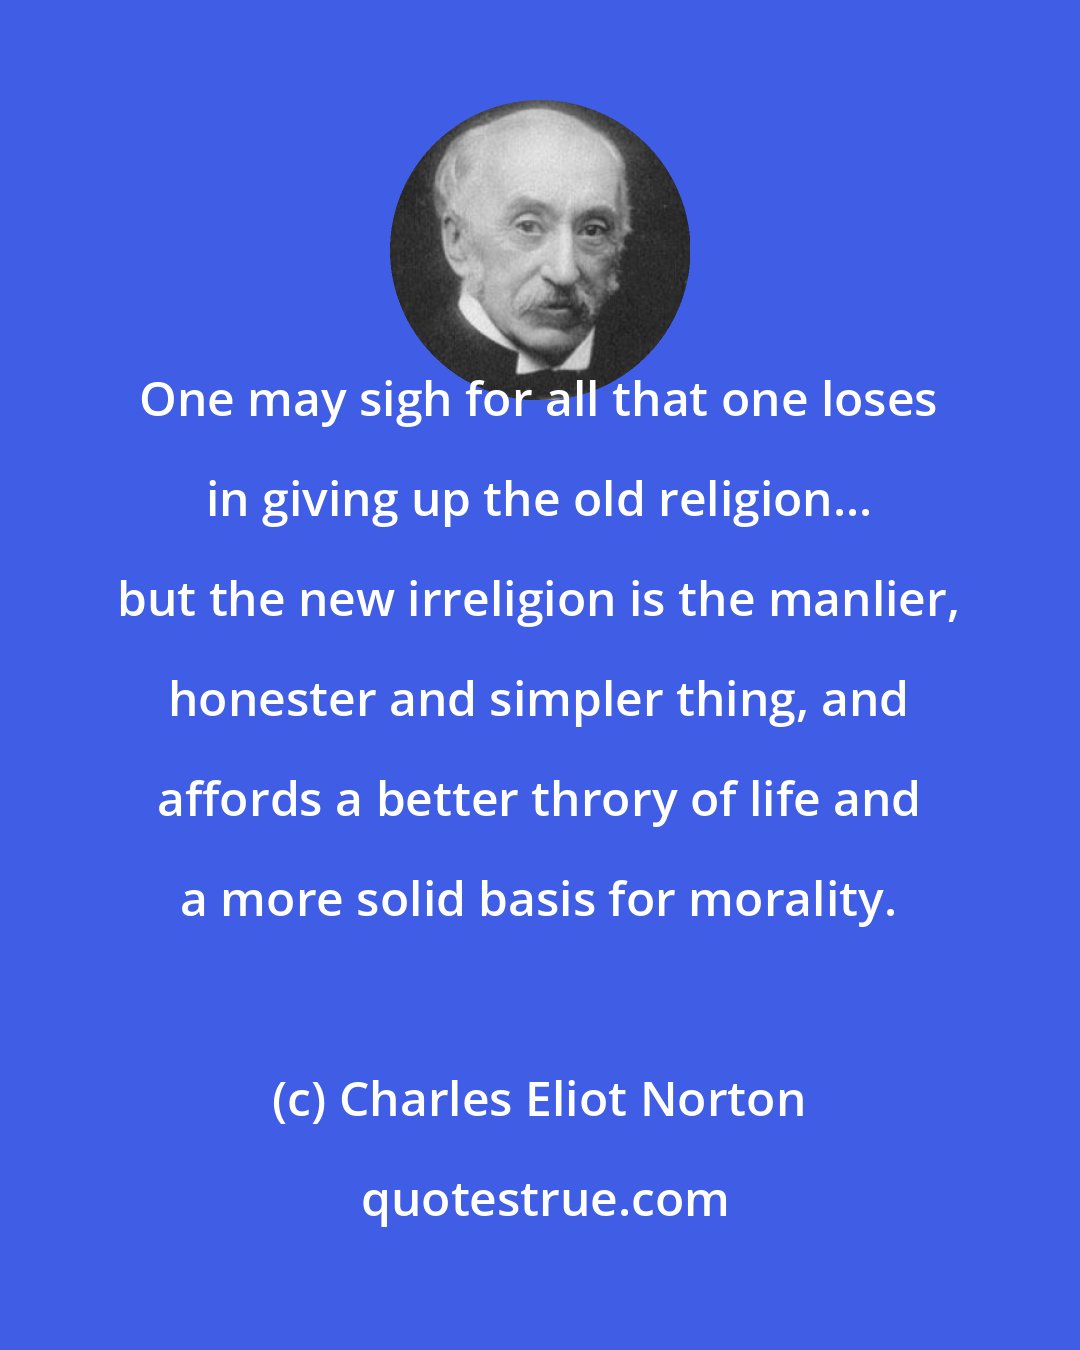 Charles Eliot Norton: One may sigh for all that one loses in giving up the old religion... but the new irreligion is the manlier, honester and simpler thing, and affords a better throry of life and a more solid basis for morality.